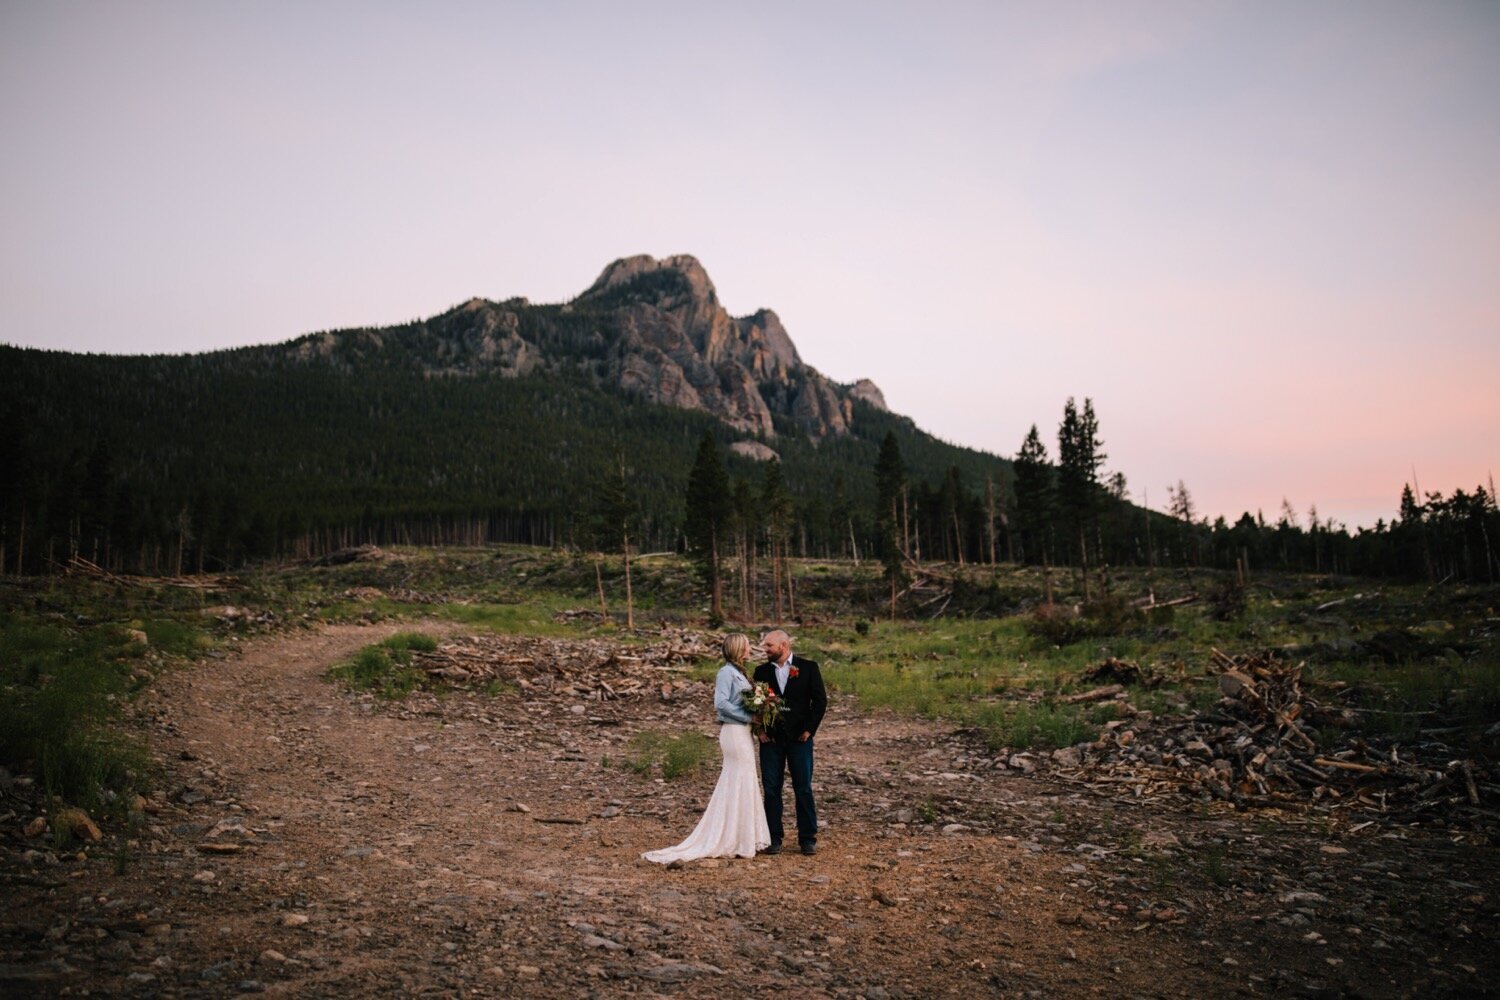  Estes Park Wedding Planner, Cheley Lodge and Grove, Cheley Colorado Camps, Colorado Wedding, Colorado Elopement, Wedding Planning, Wedding Inspiration, Wedding ideas, Elopement Planning, Elopement Inspiration, Elopement ideas, Small Wedding, Intimat